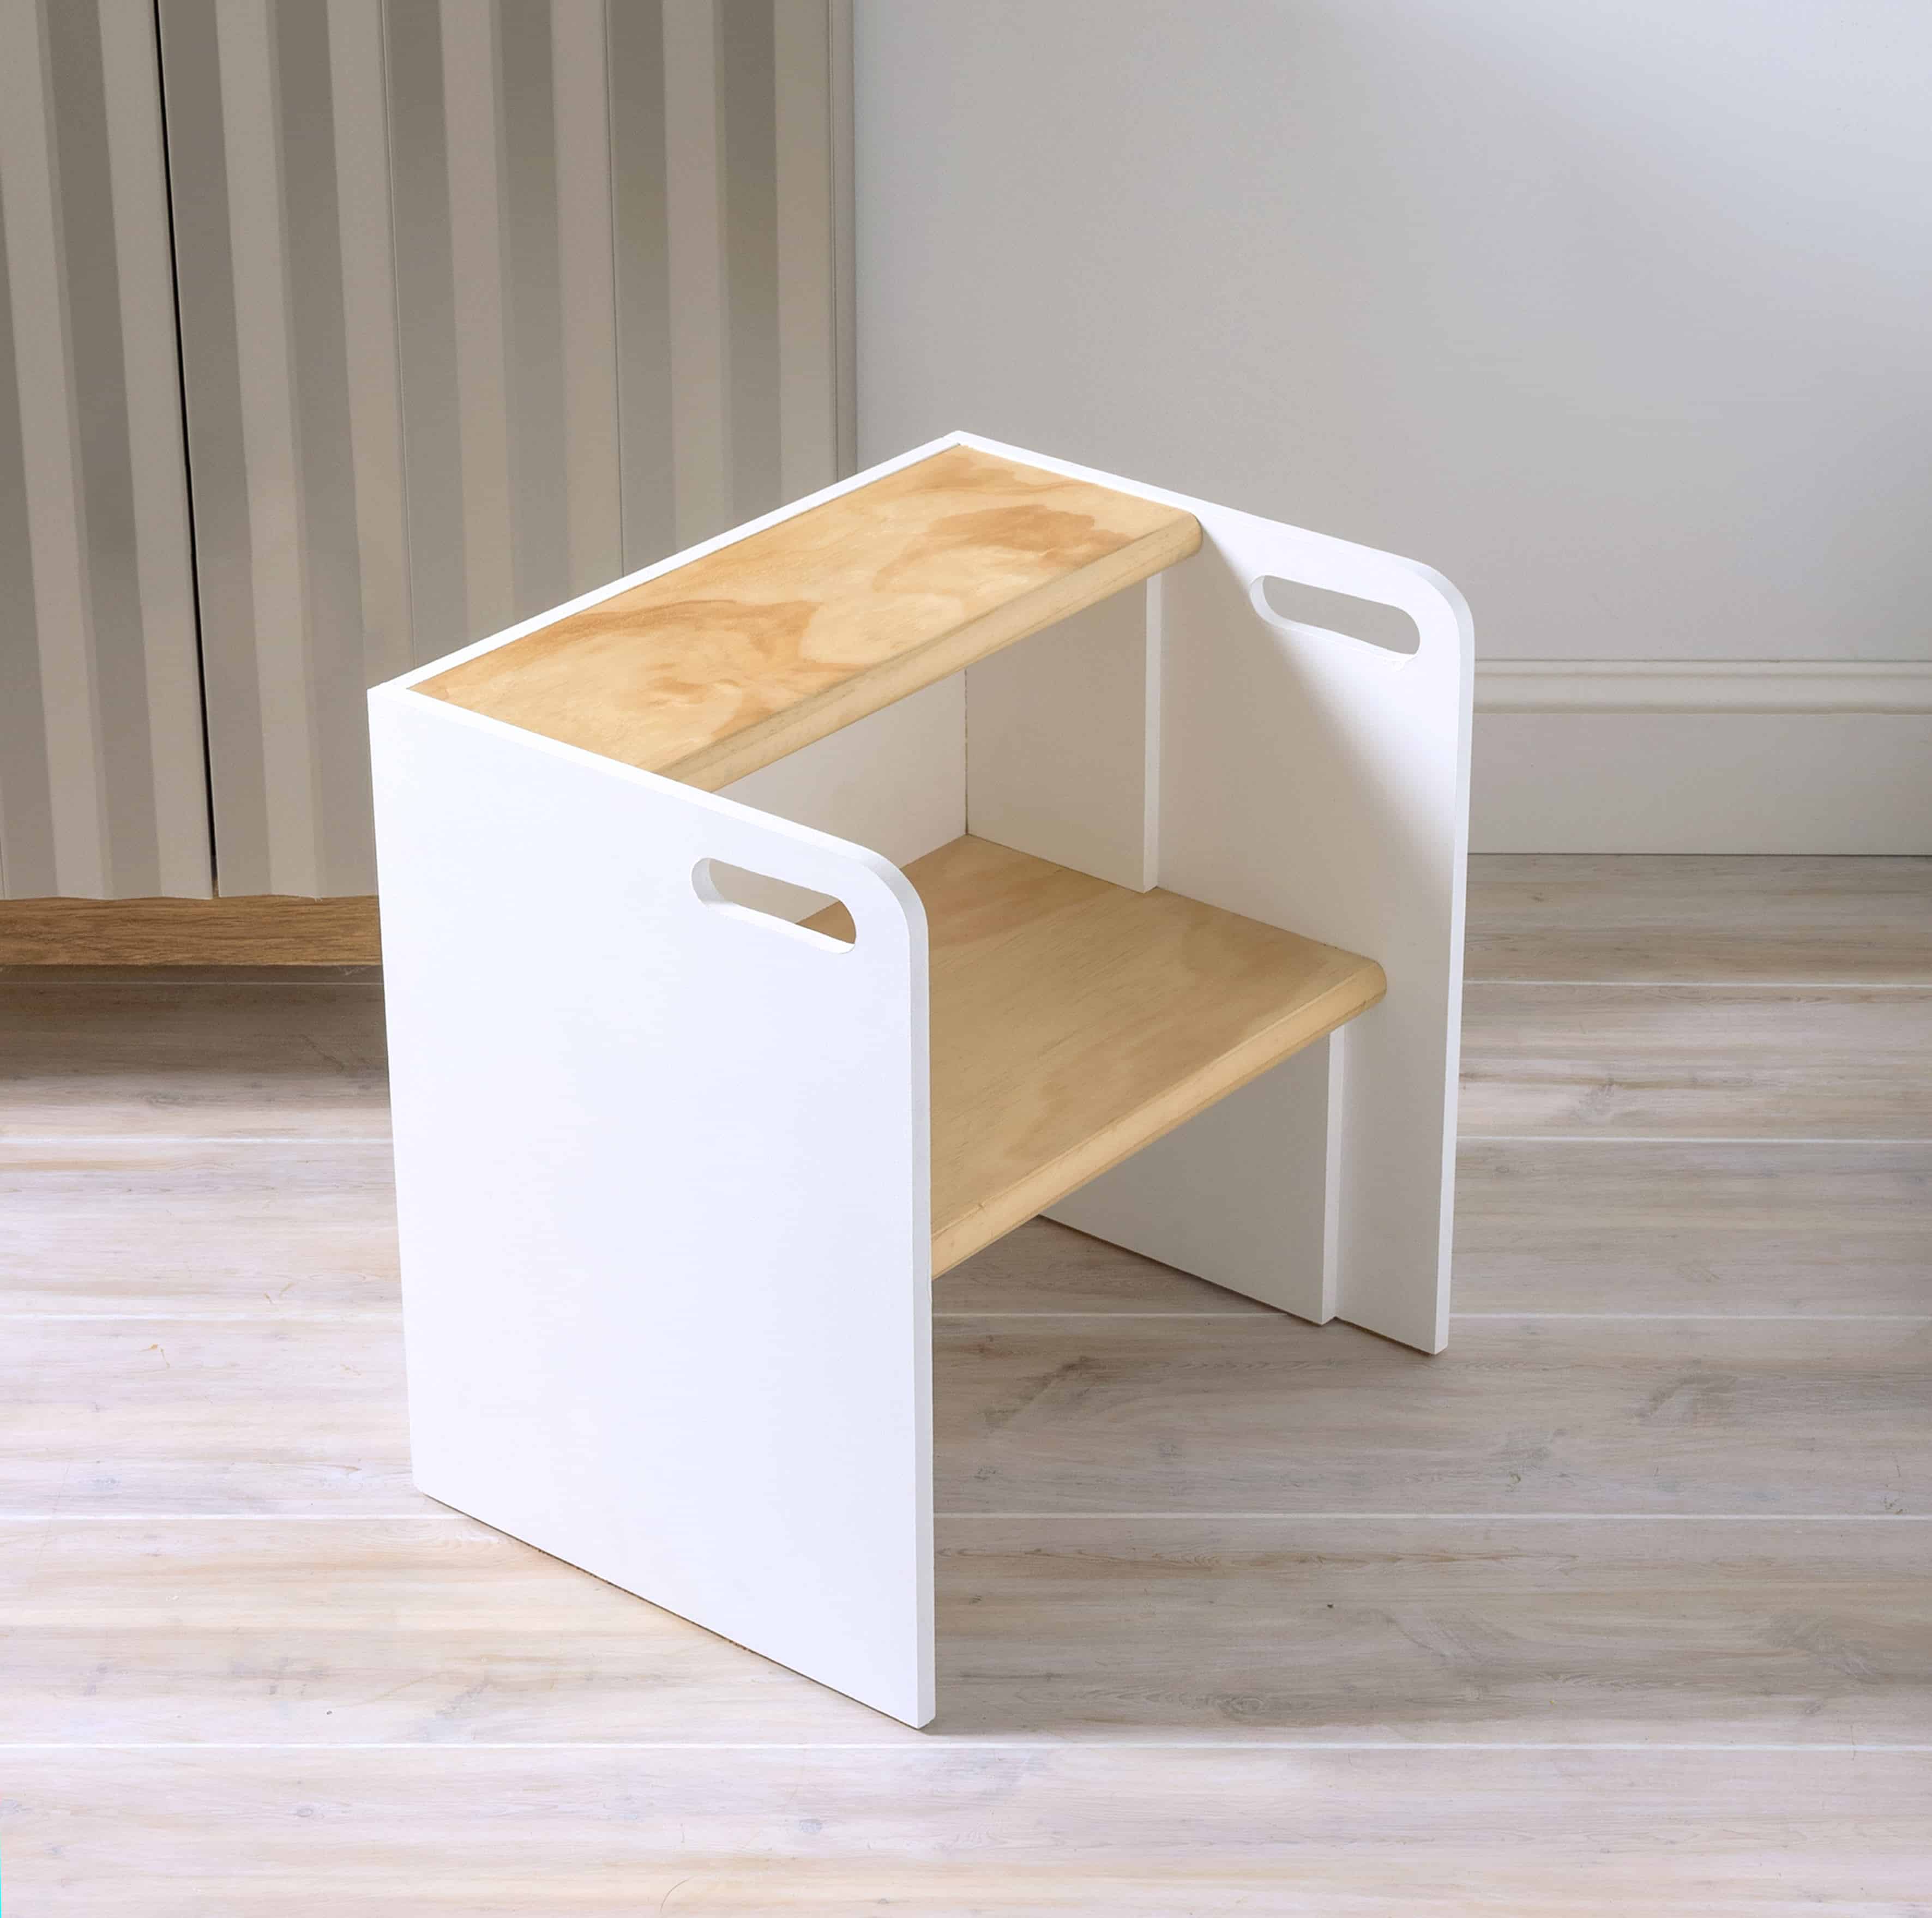 DIY Wooden Step Stool That Doubles as a Chair